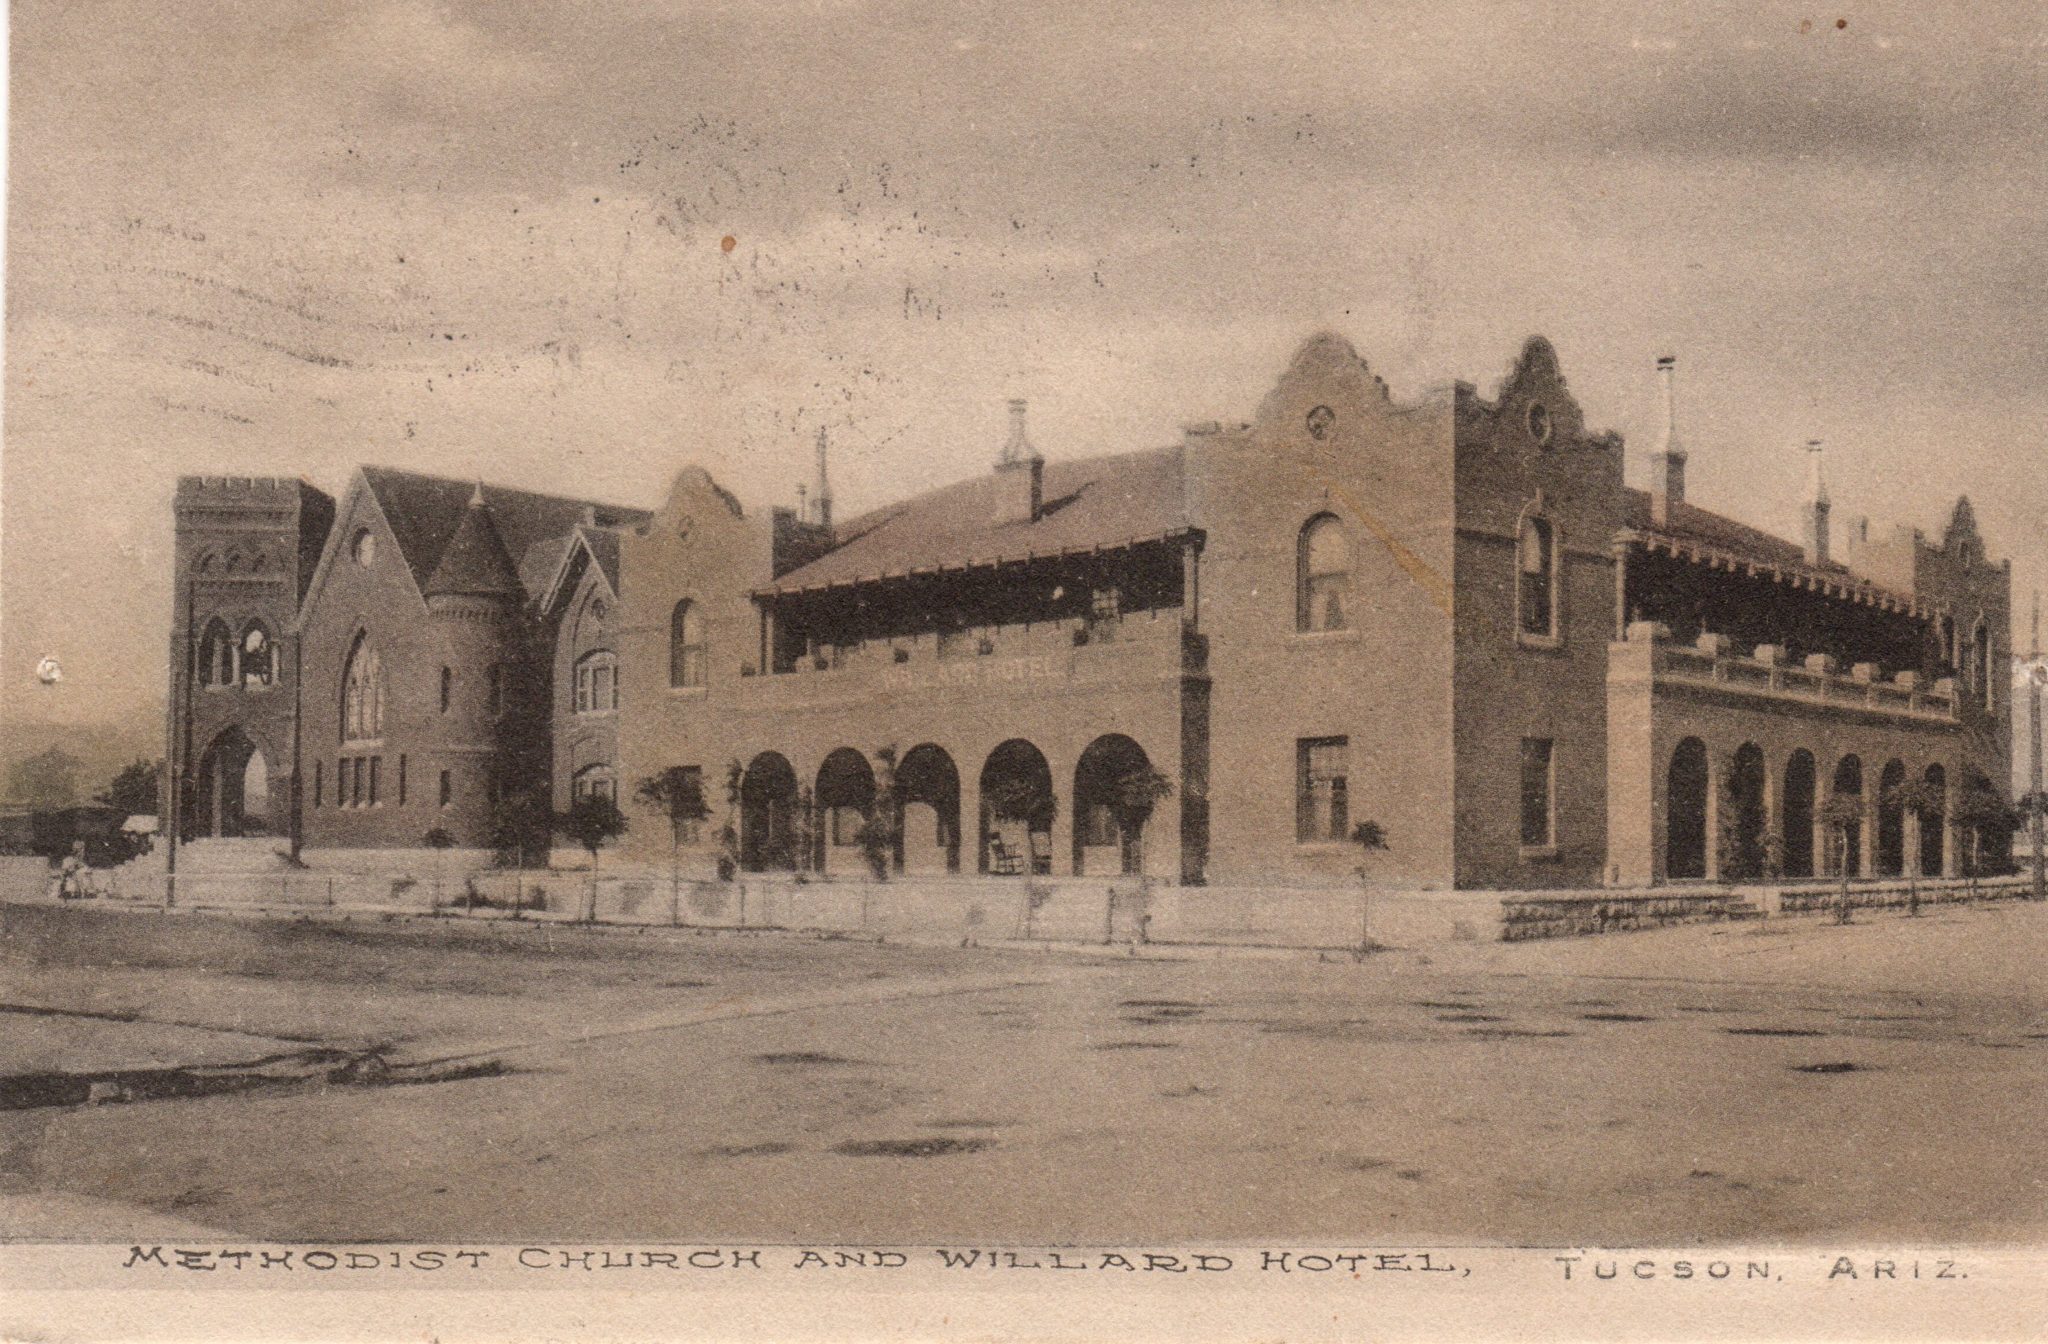 Early Tucson Hotel